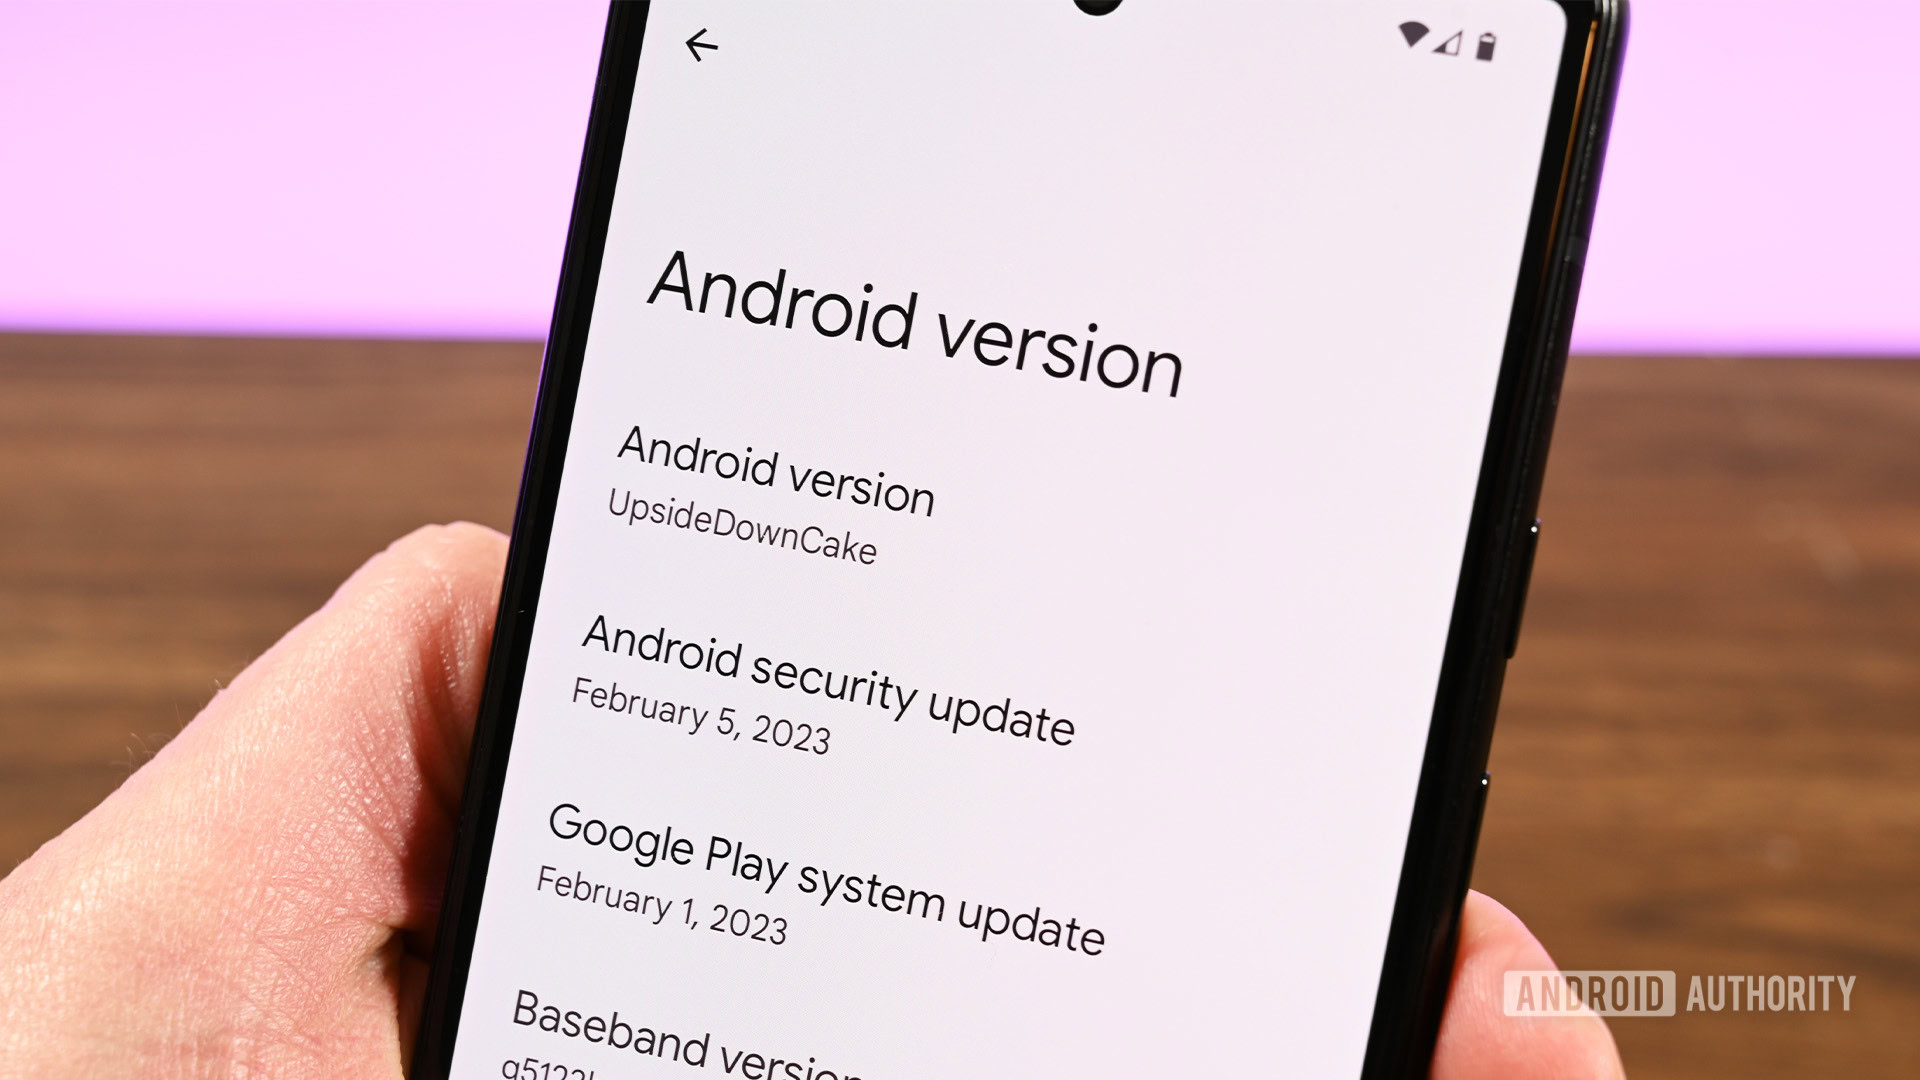 Android 14: Official news, new OS features and updates